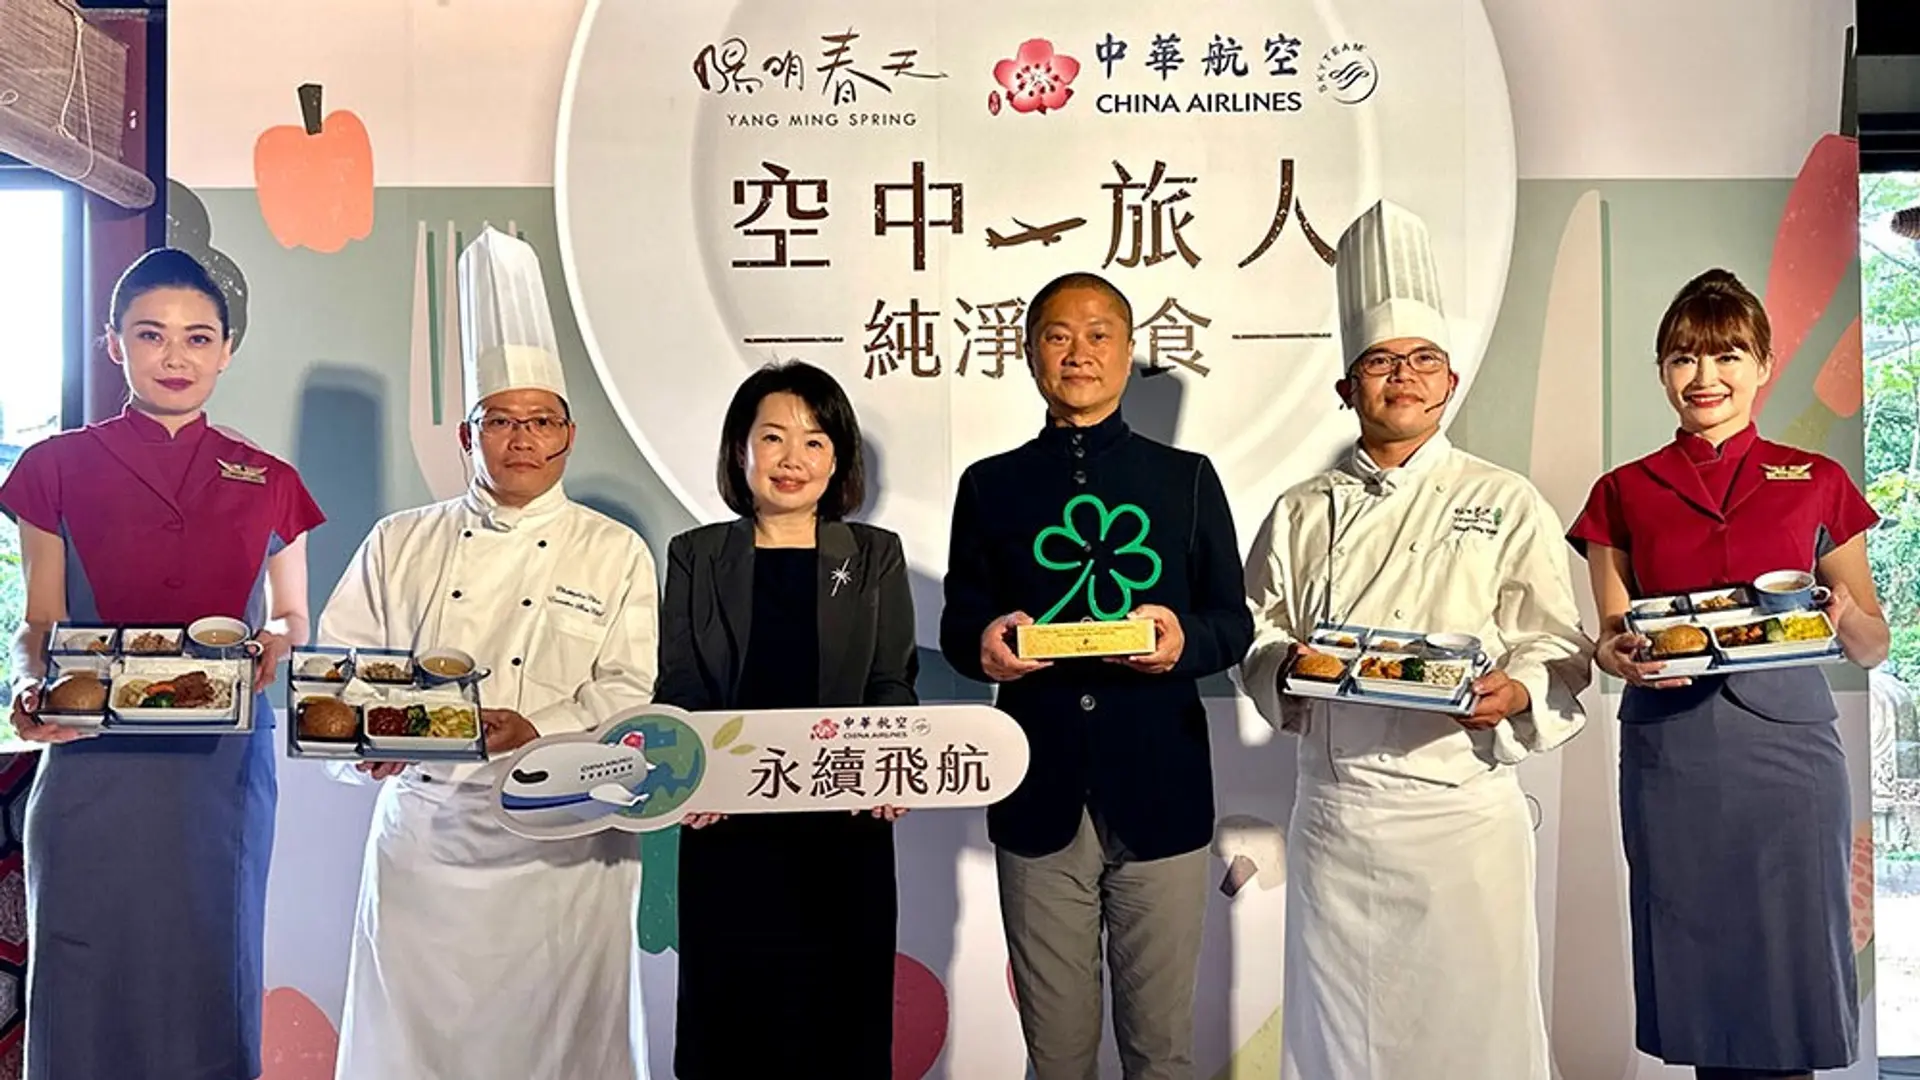 Airlines News - China Airlines serves Michelin Green Star cuisine